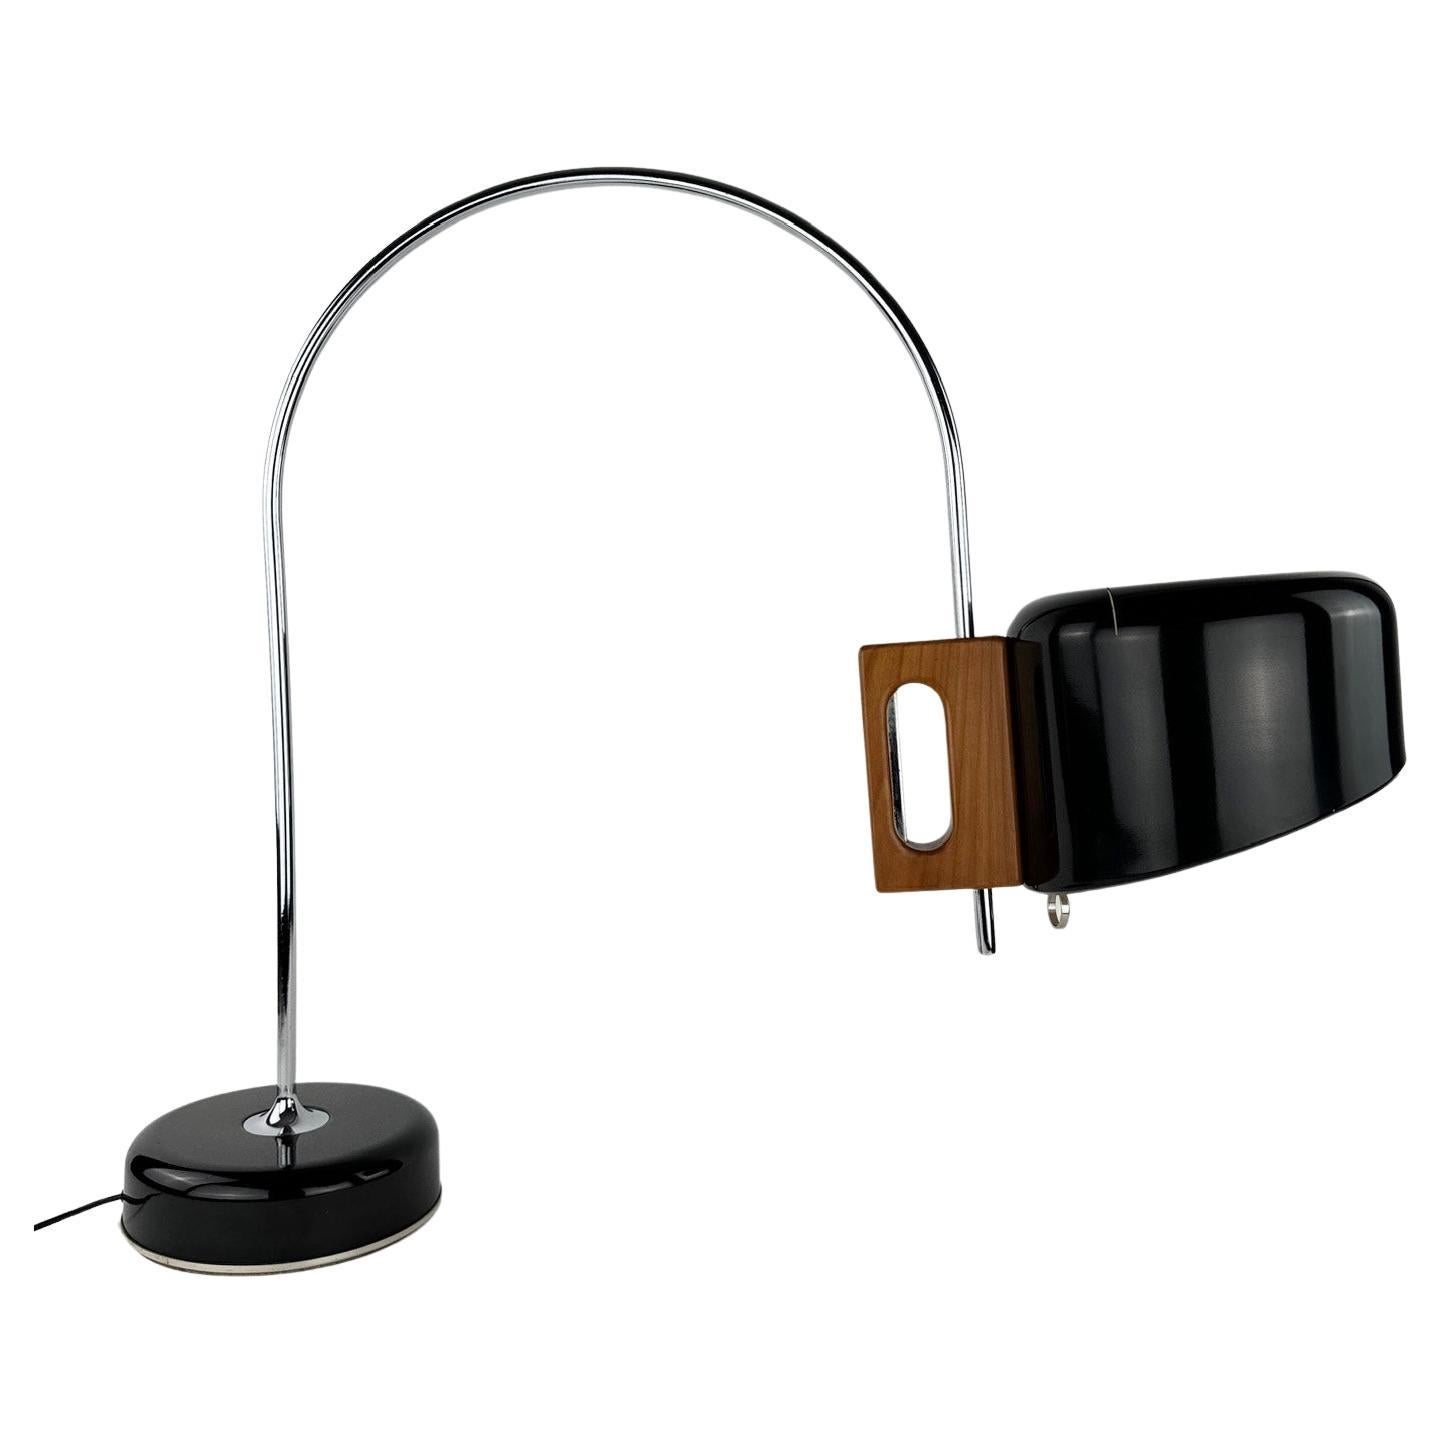 Magnificent "Sauce" table lamp Black Edition by Tomás Díaz Magro for Fase 1960s.